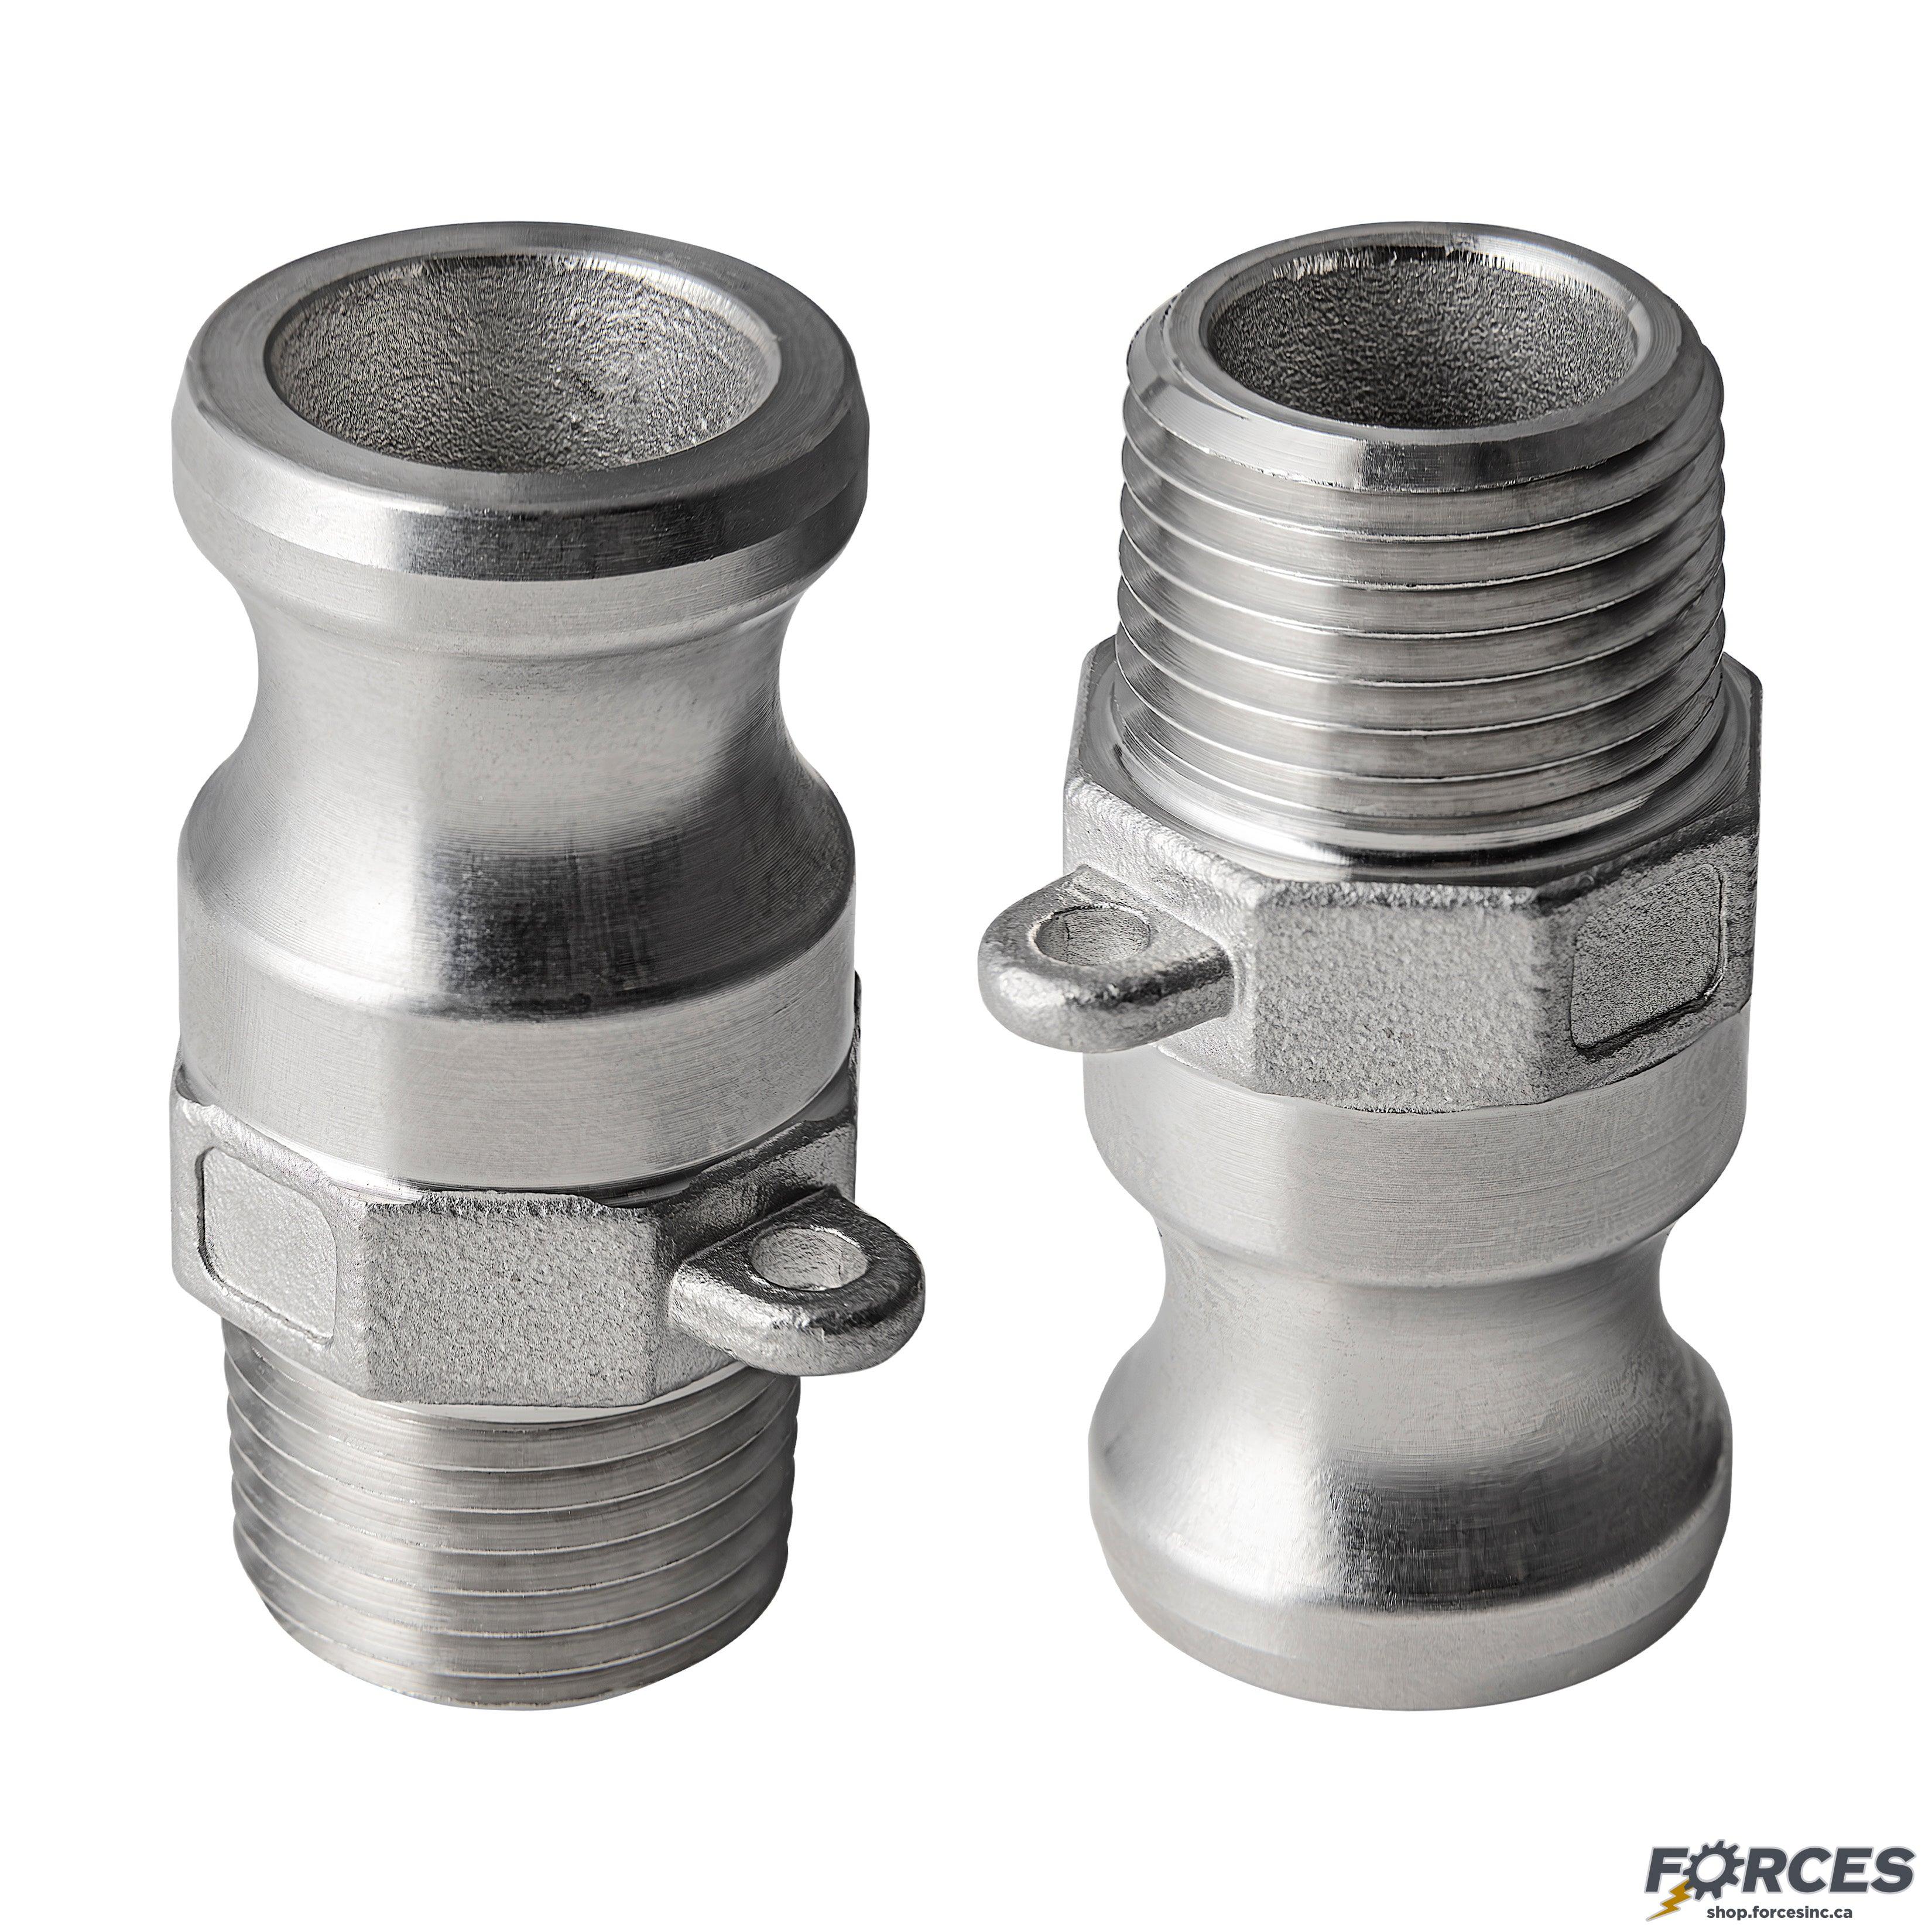 2-1/2" Type F Camlock Fitting Stainless Steel 316 - Forces Inc